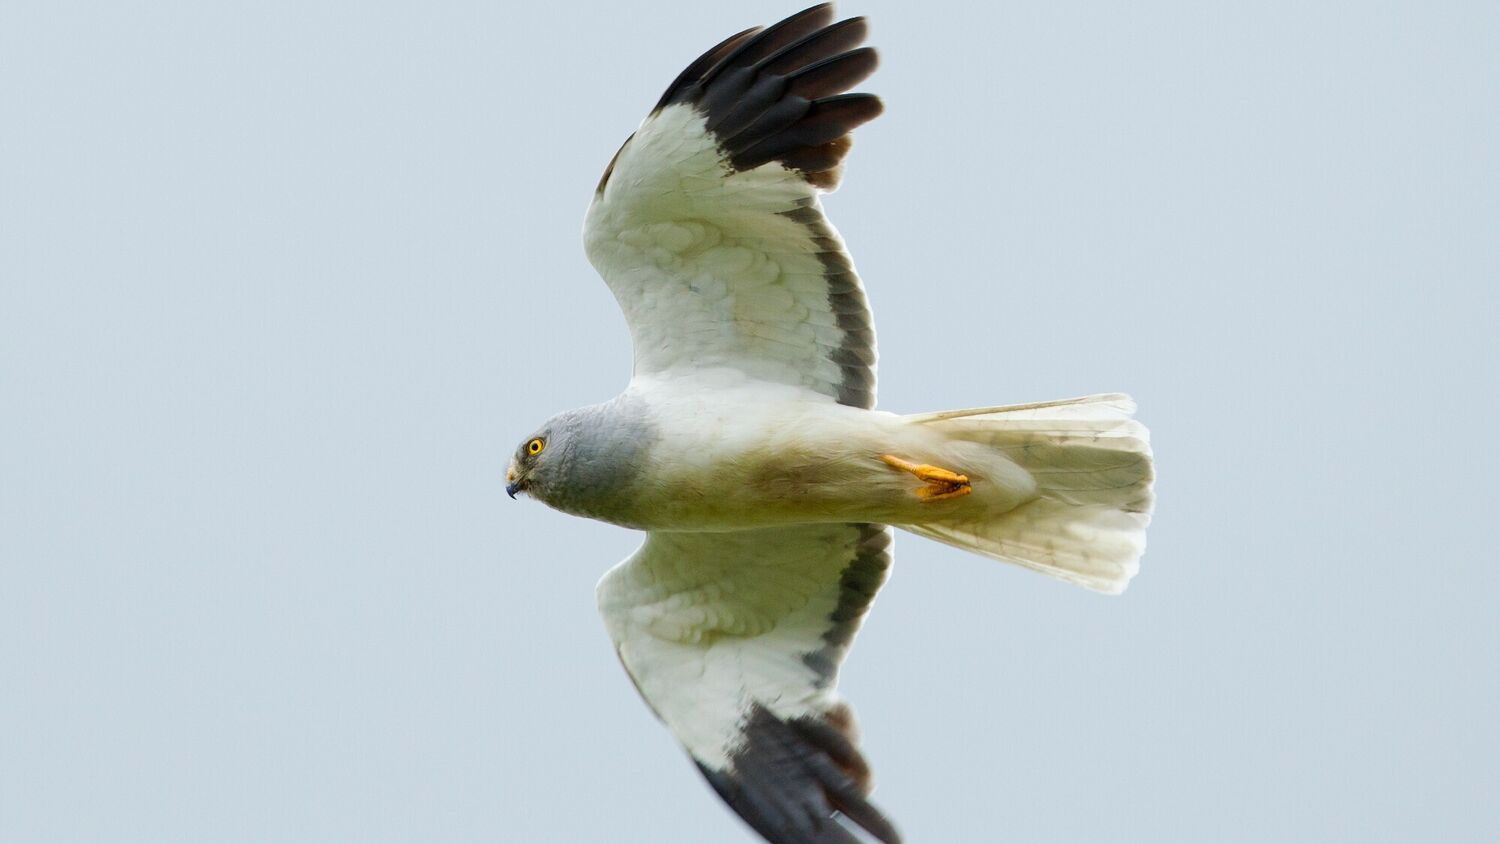 A hen harrier in flight. It has a predominantly white body, with black-tipped wings.